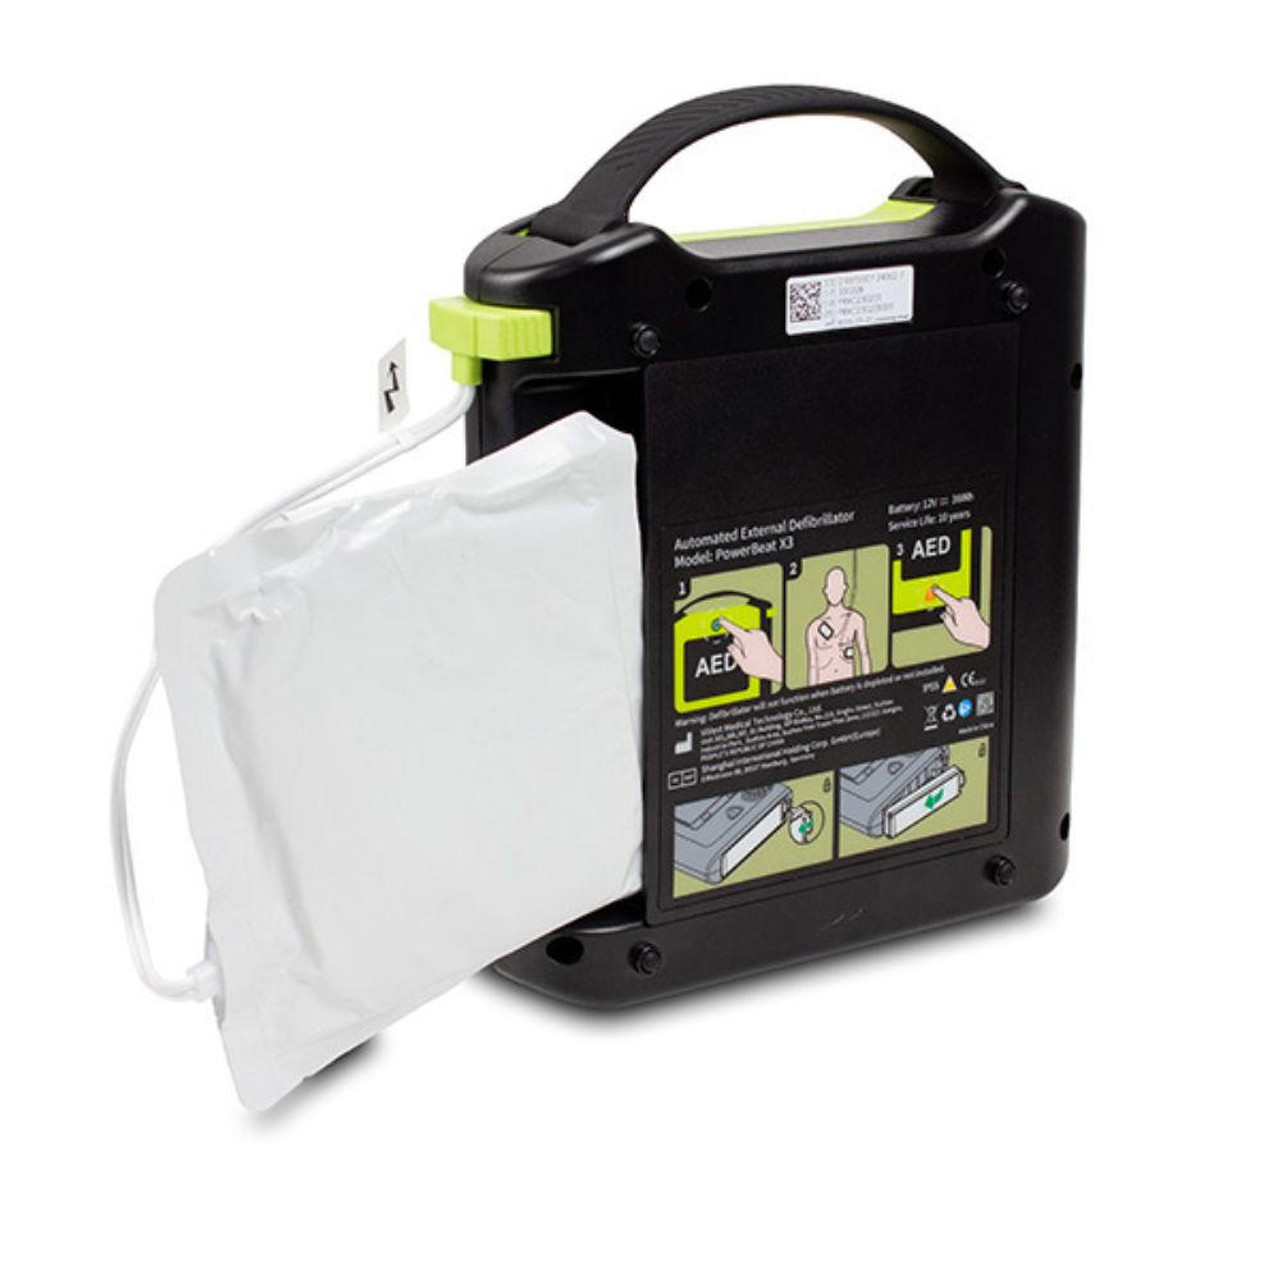 FAQ3691 Vivest Power Beat X3 with Full Colour Screen Semi Automatic AED Defibrillator Compact Lightweight   